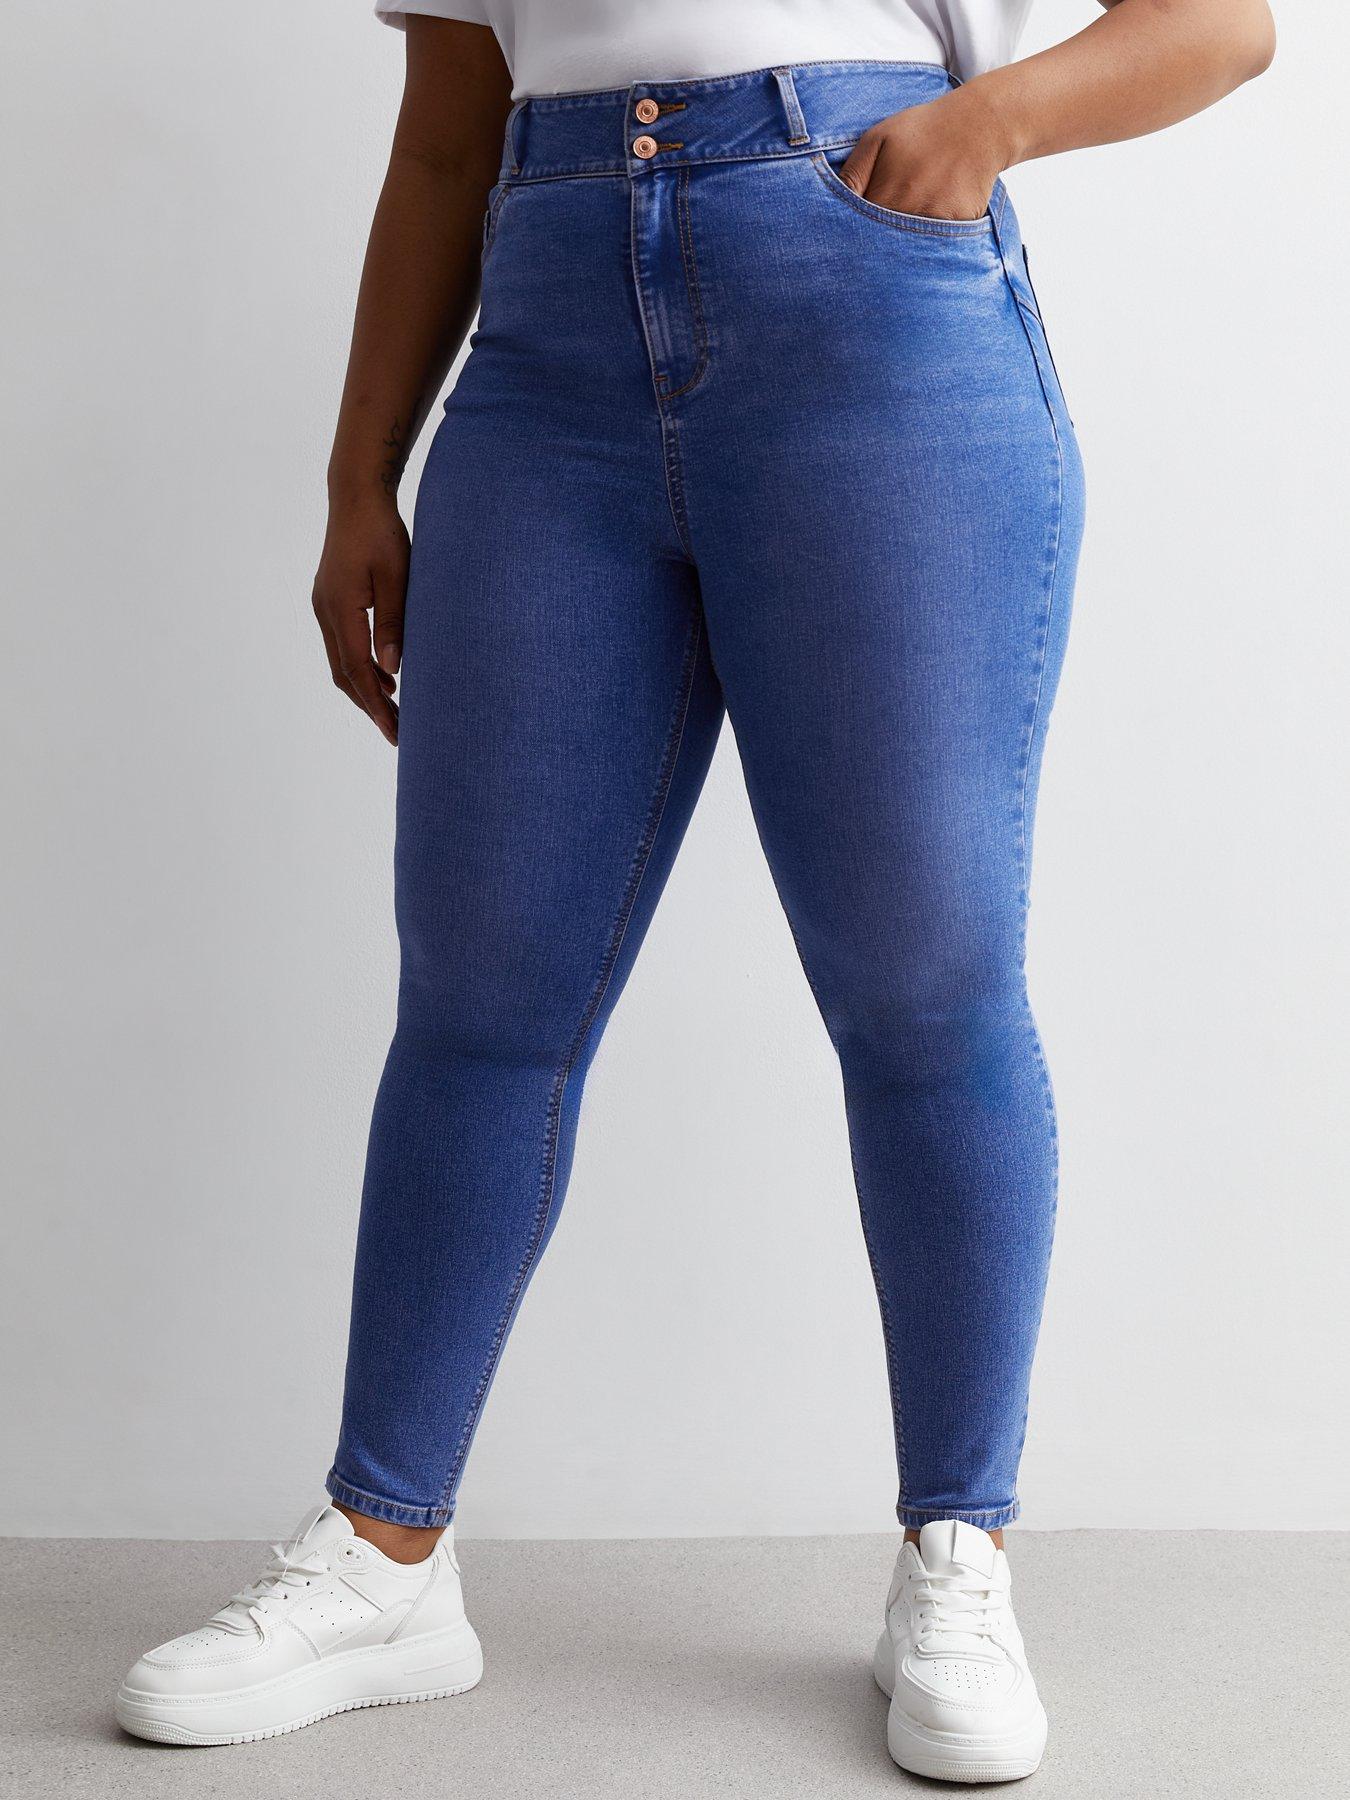 Bright Blue Mid Rise Lift & Shape Emilee Jeggings New Look, £19.99